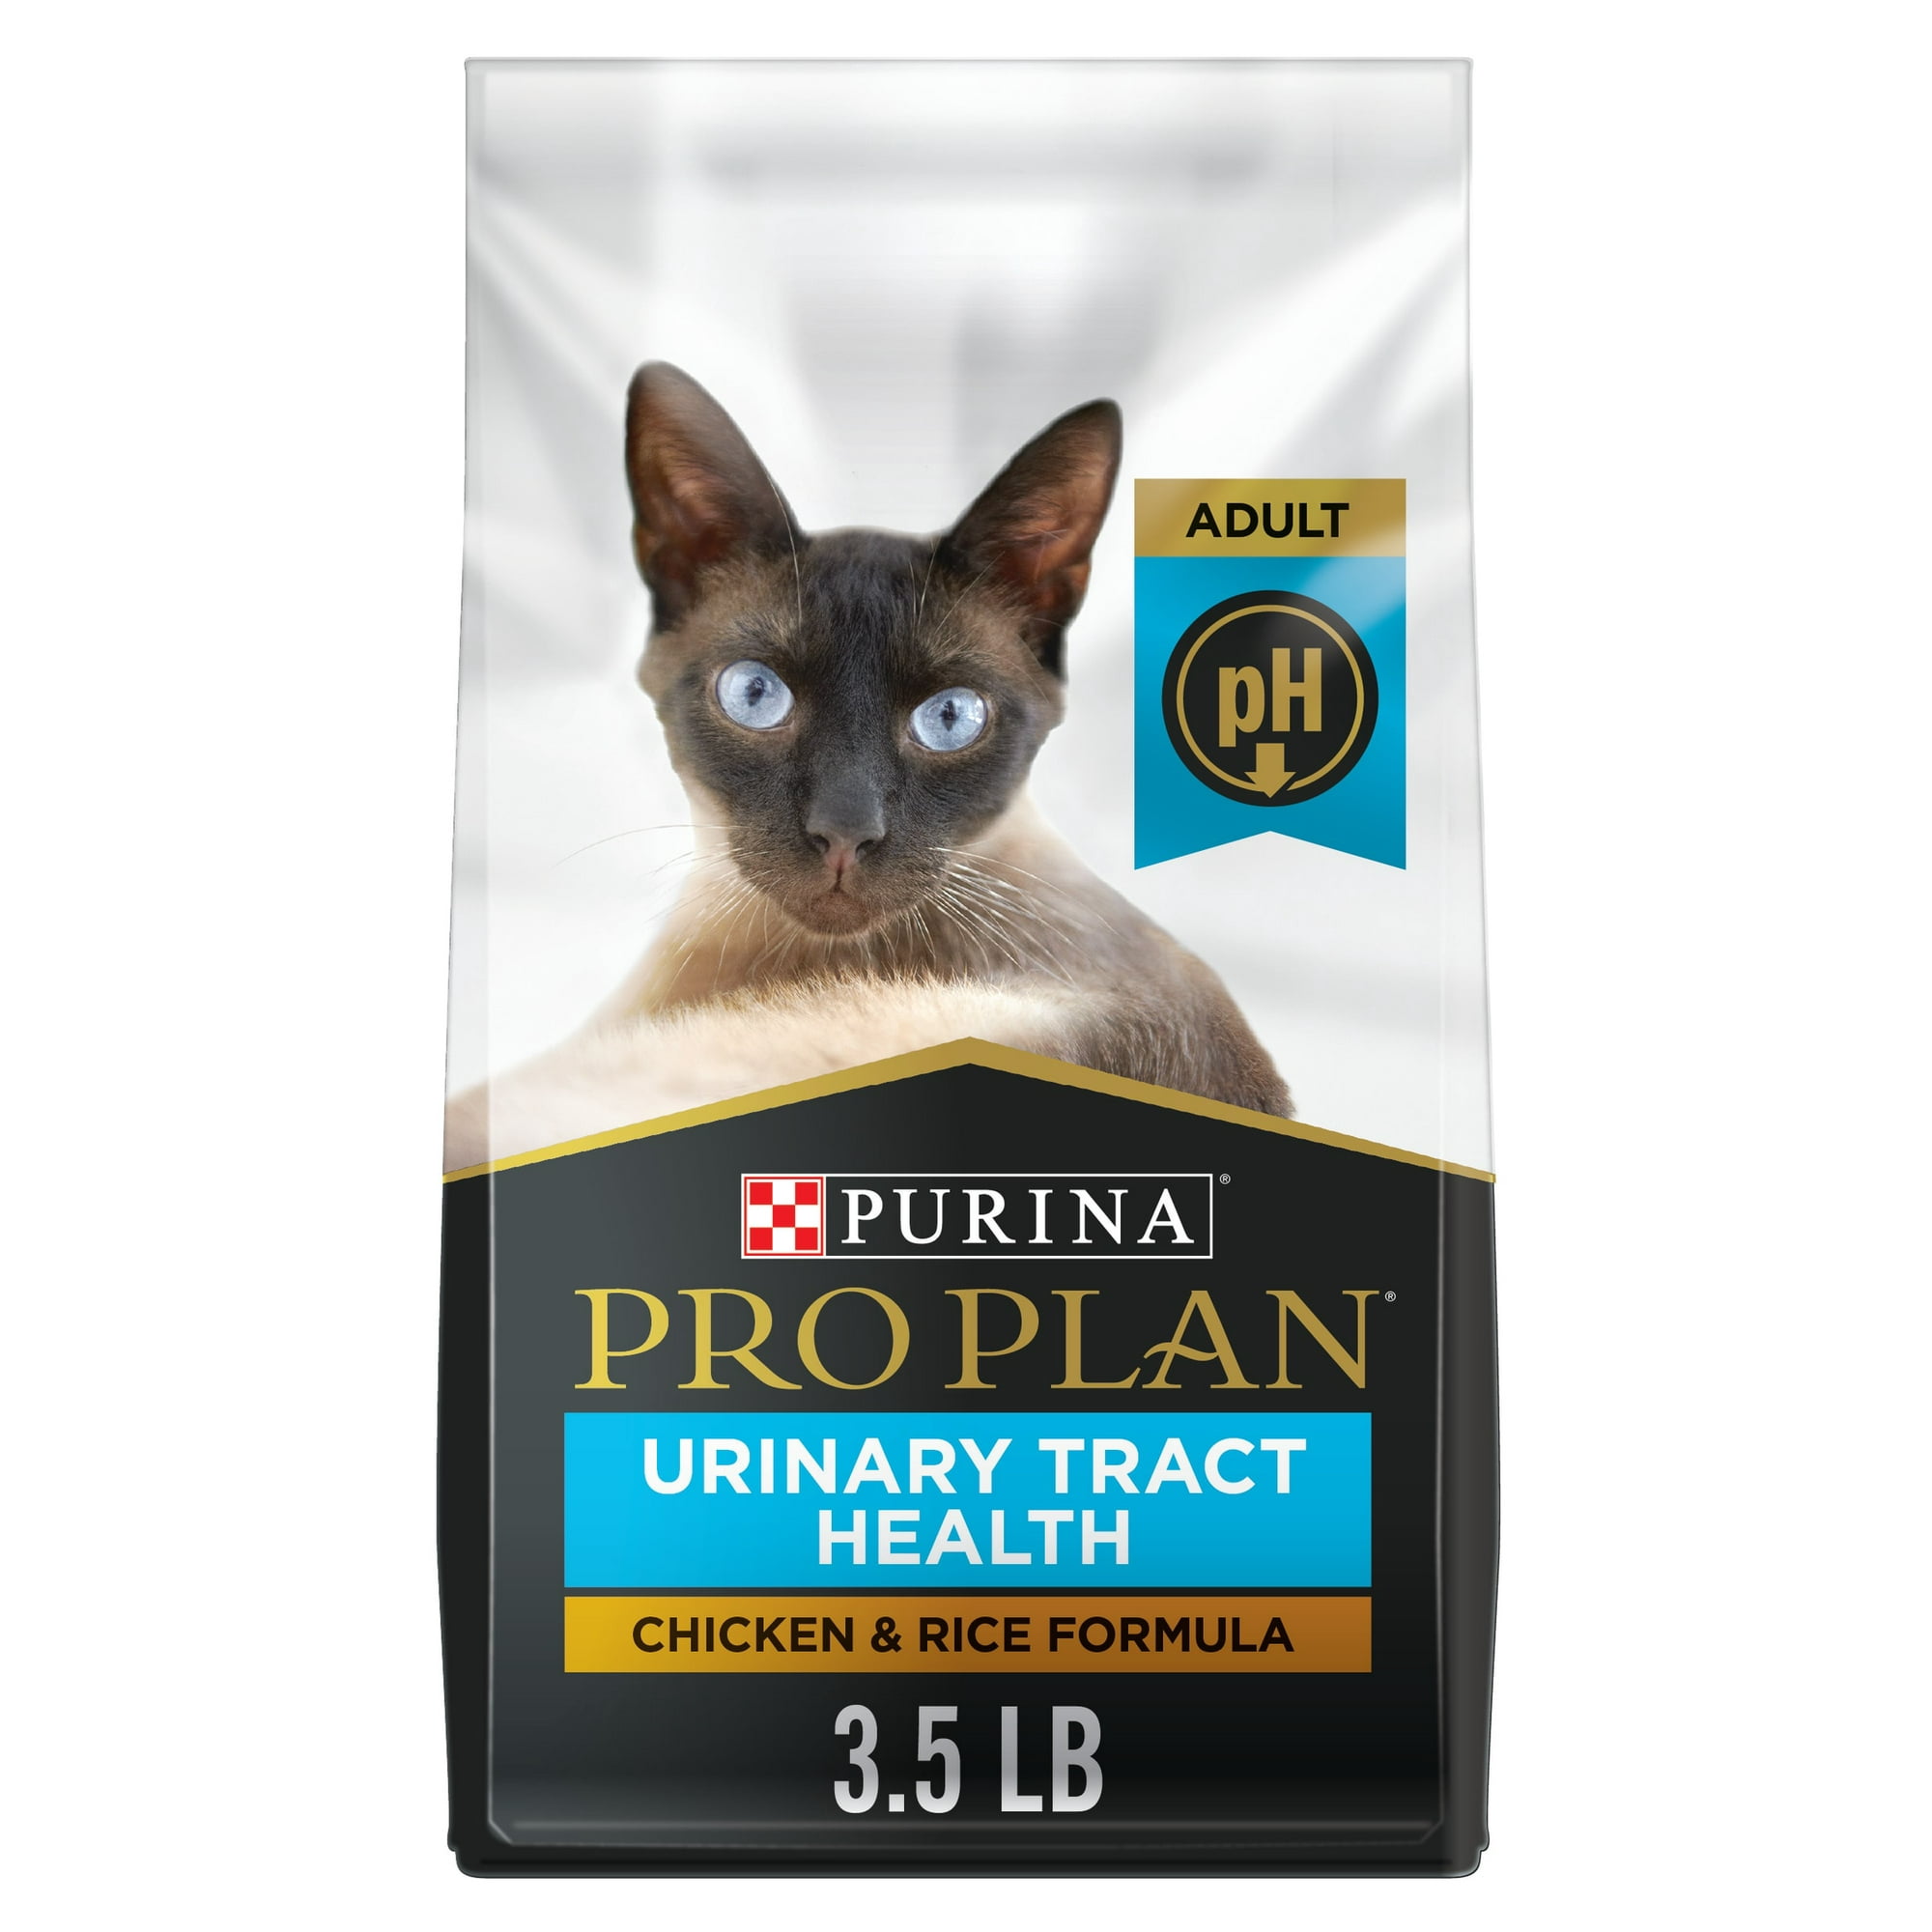 Purina Pro Plan Urinary Tract Cat Food, Chicken and Rice Formula, 3.5 lb. Bag